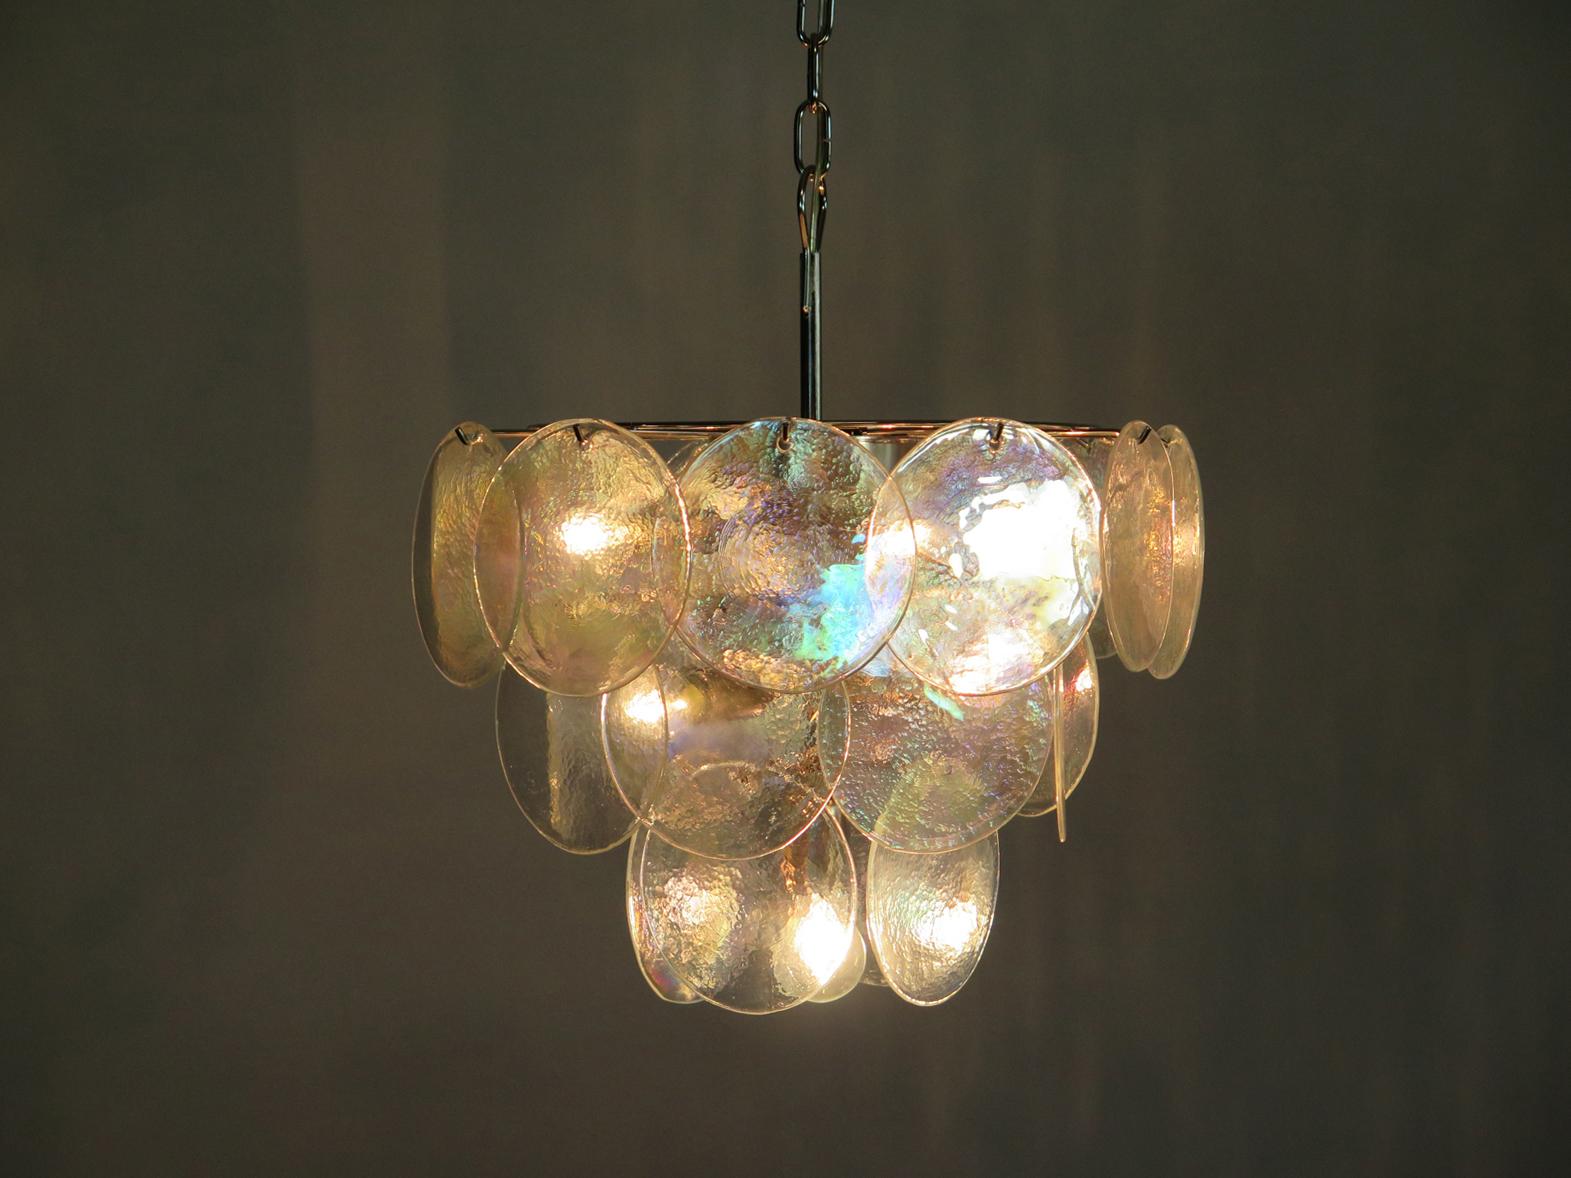 Galvanized High quality Murano chandelier space age – 23 iridescent glasses For Sale